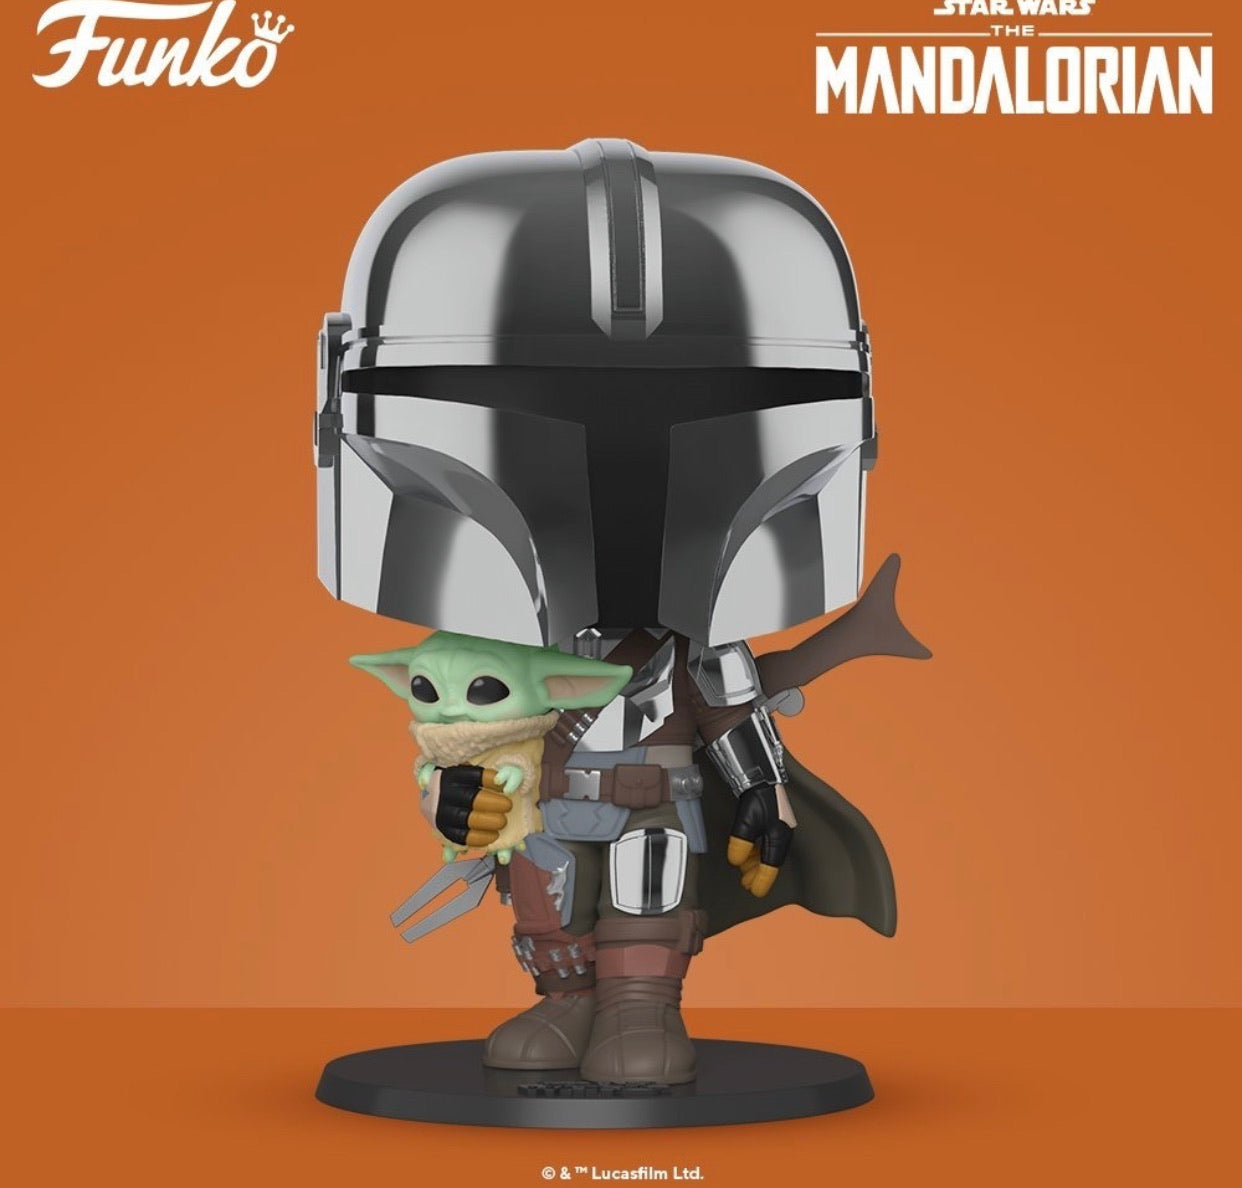 Star Wars The Mandalorian with Chrome Armour Carrying Baby Yoda 10-Inch Funko Pop! Vinyl(PREORDER)